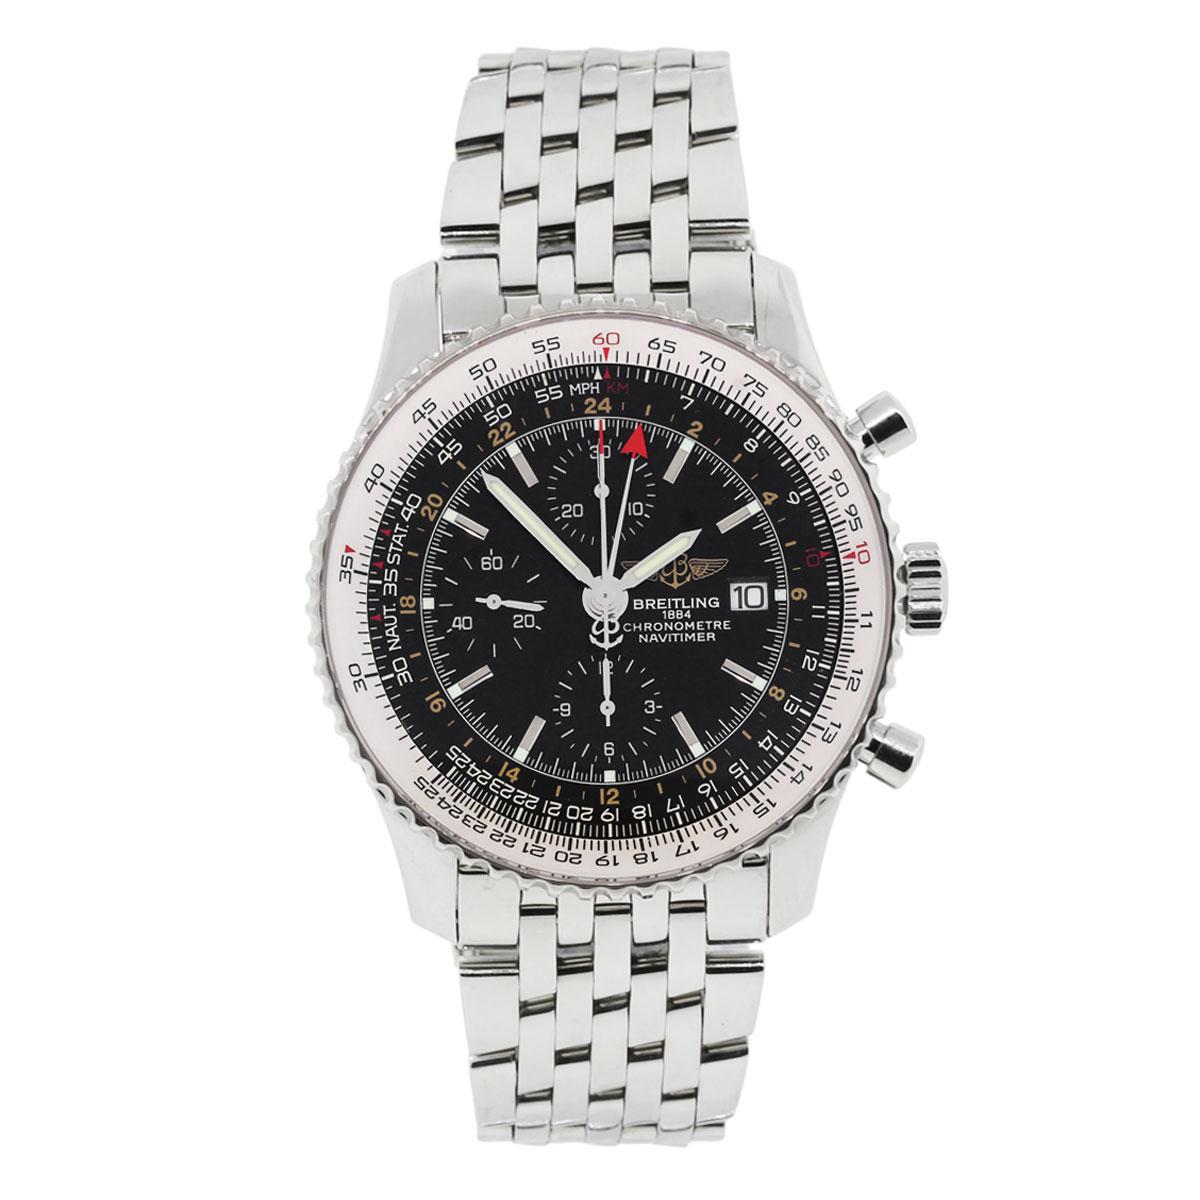 Brand: Breitling
MPN: A243212
Model: Navitimer
Case Material: Stainless Steel
Case Diameter: 46mm
Crystal: Scratch resistant sapphire
Bezel: Uni-directional bezel
Dial: Black Chronograph and GMT dial features date and 2nd time zone display
Bracelet: